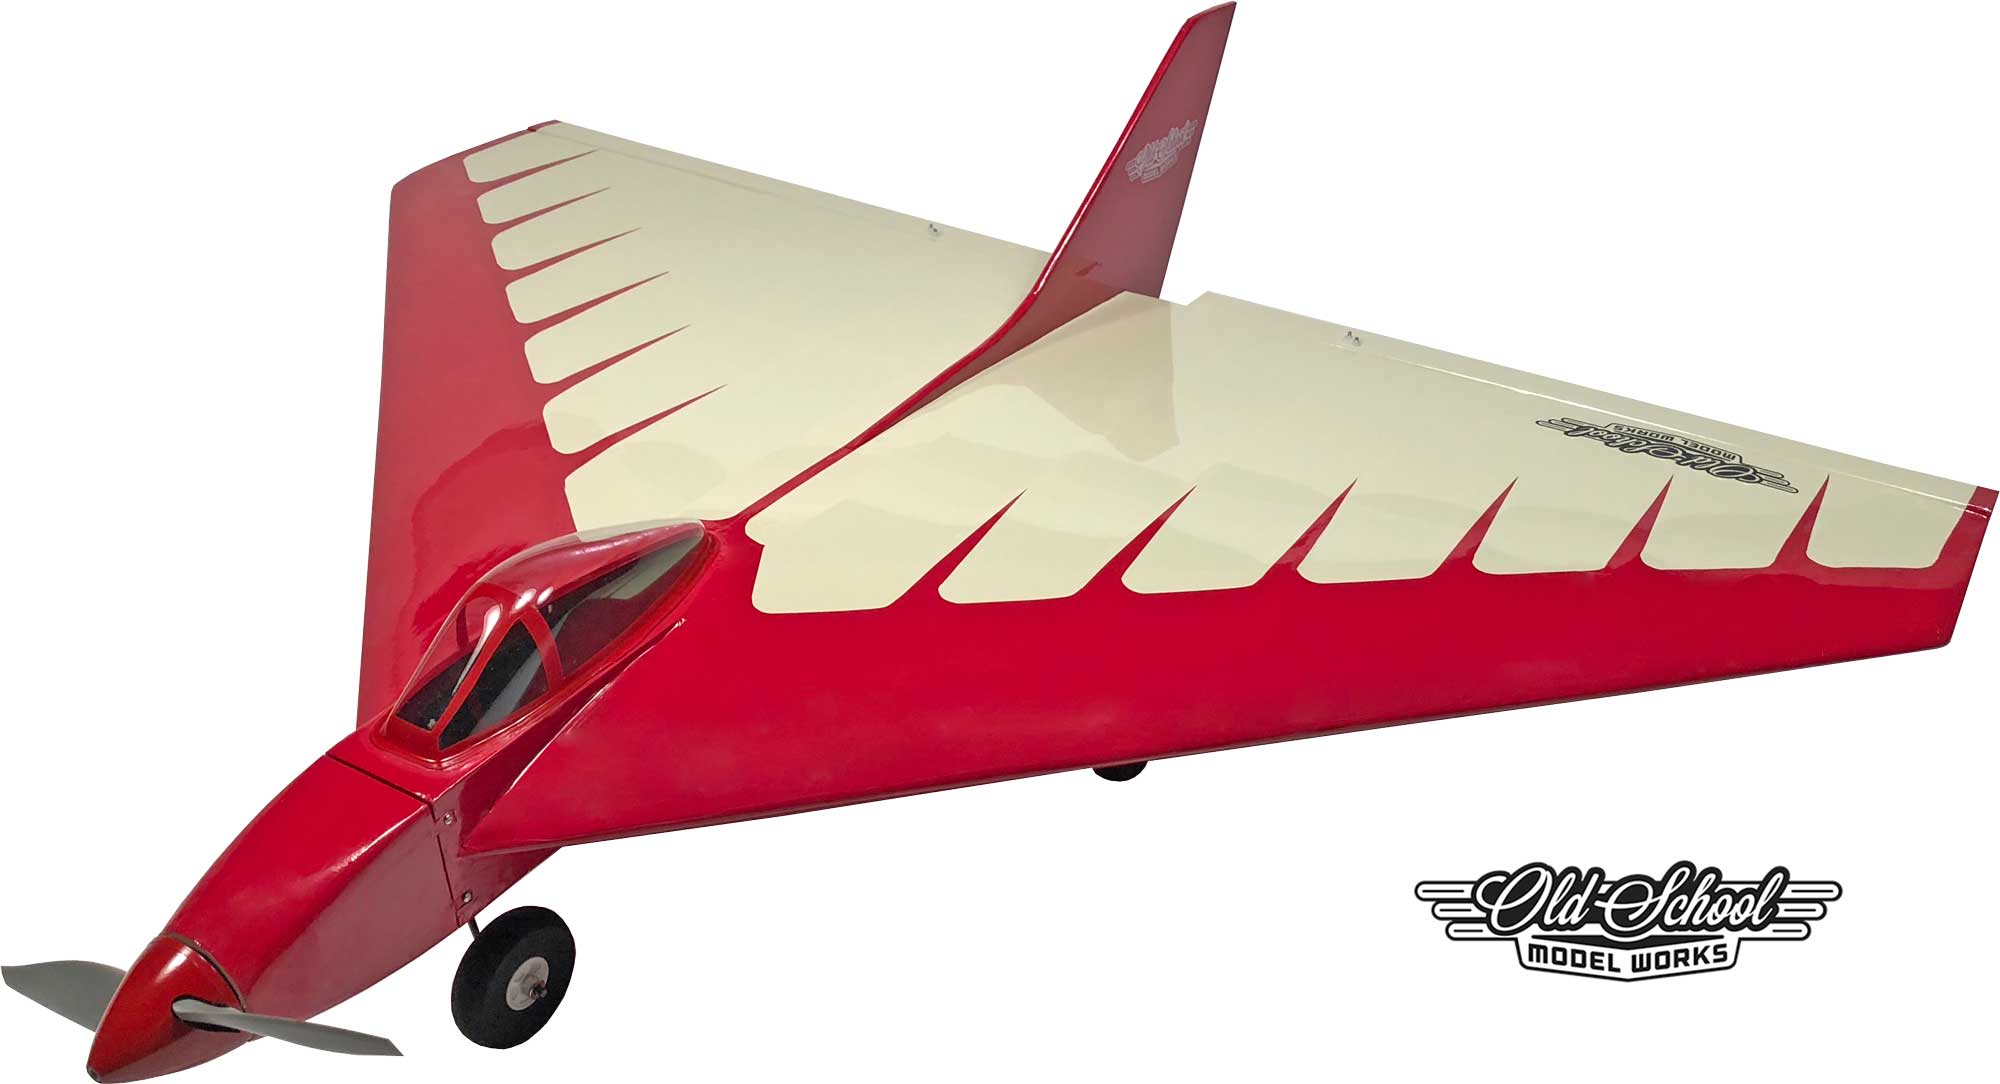 Comet RC Airplane Kit from Old School Model Works